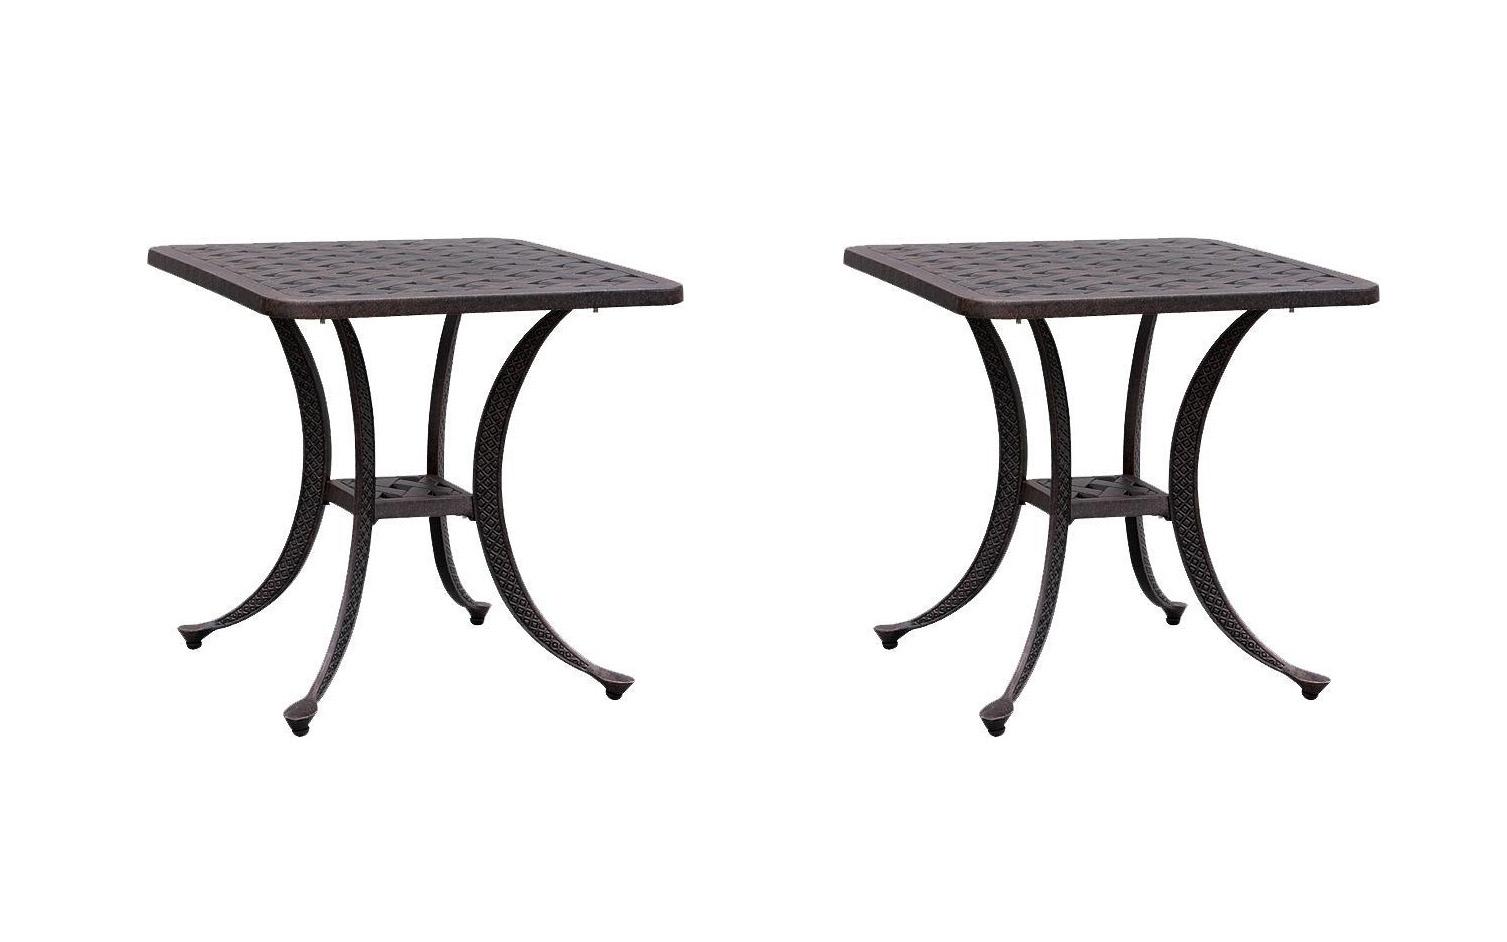 CaliPatio Weave Patio Accent Table